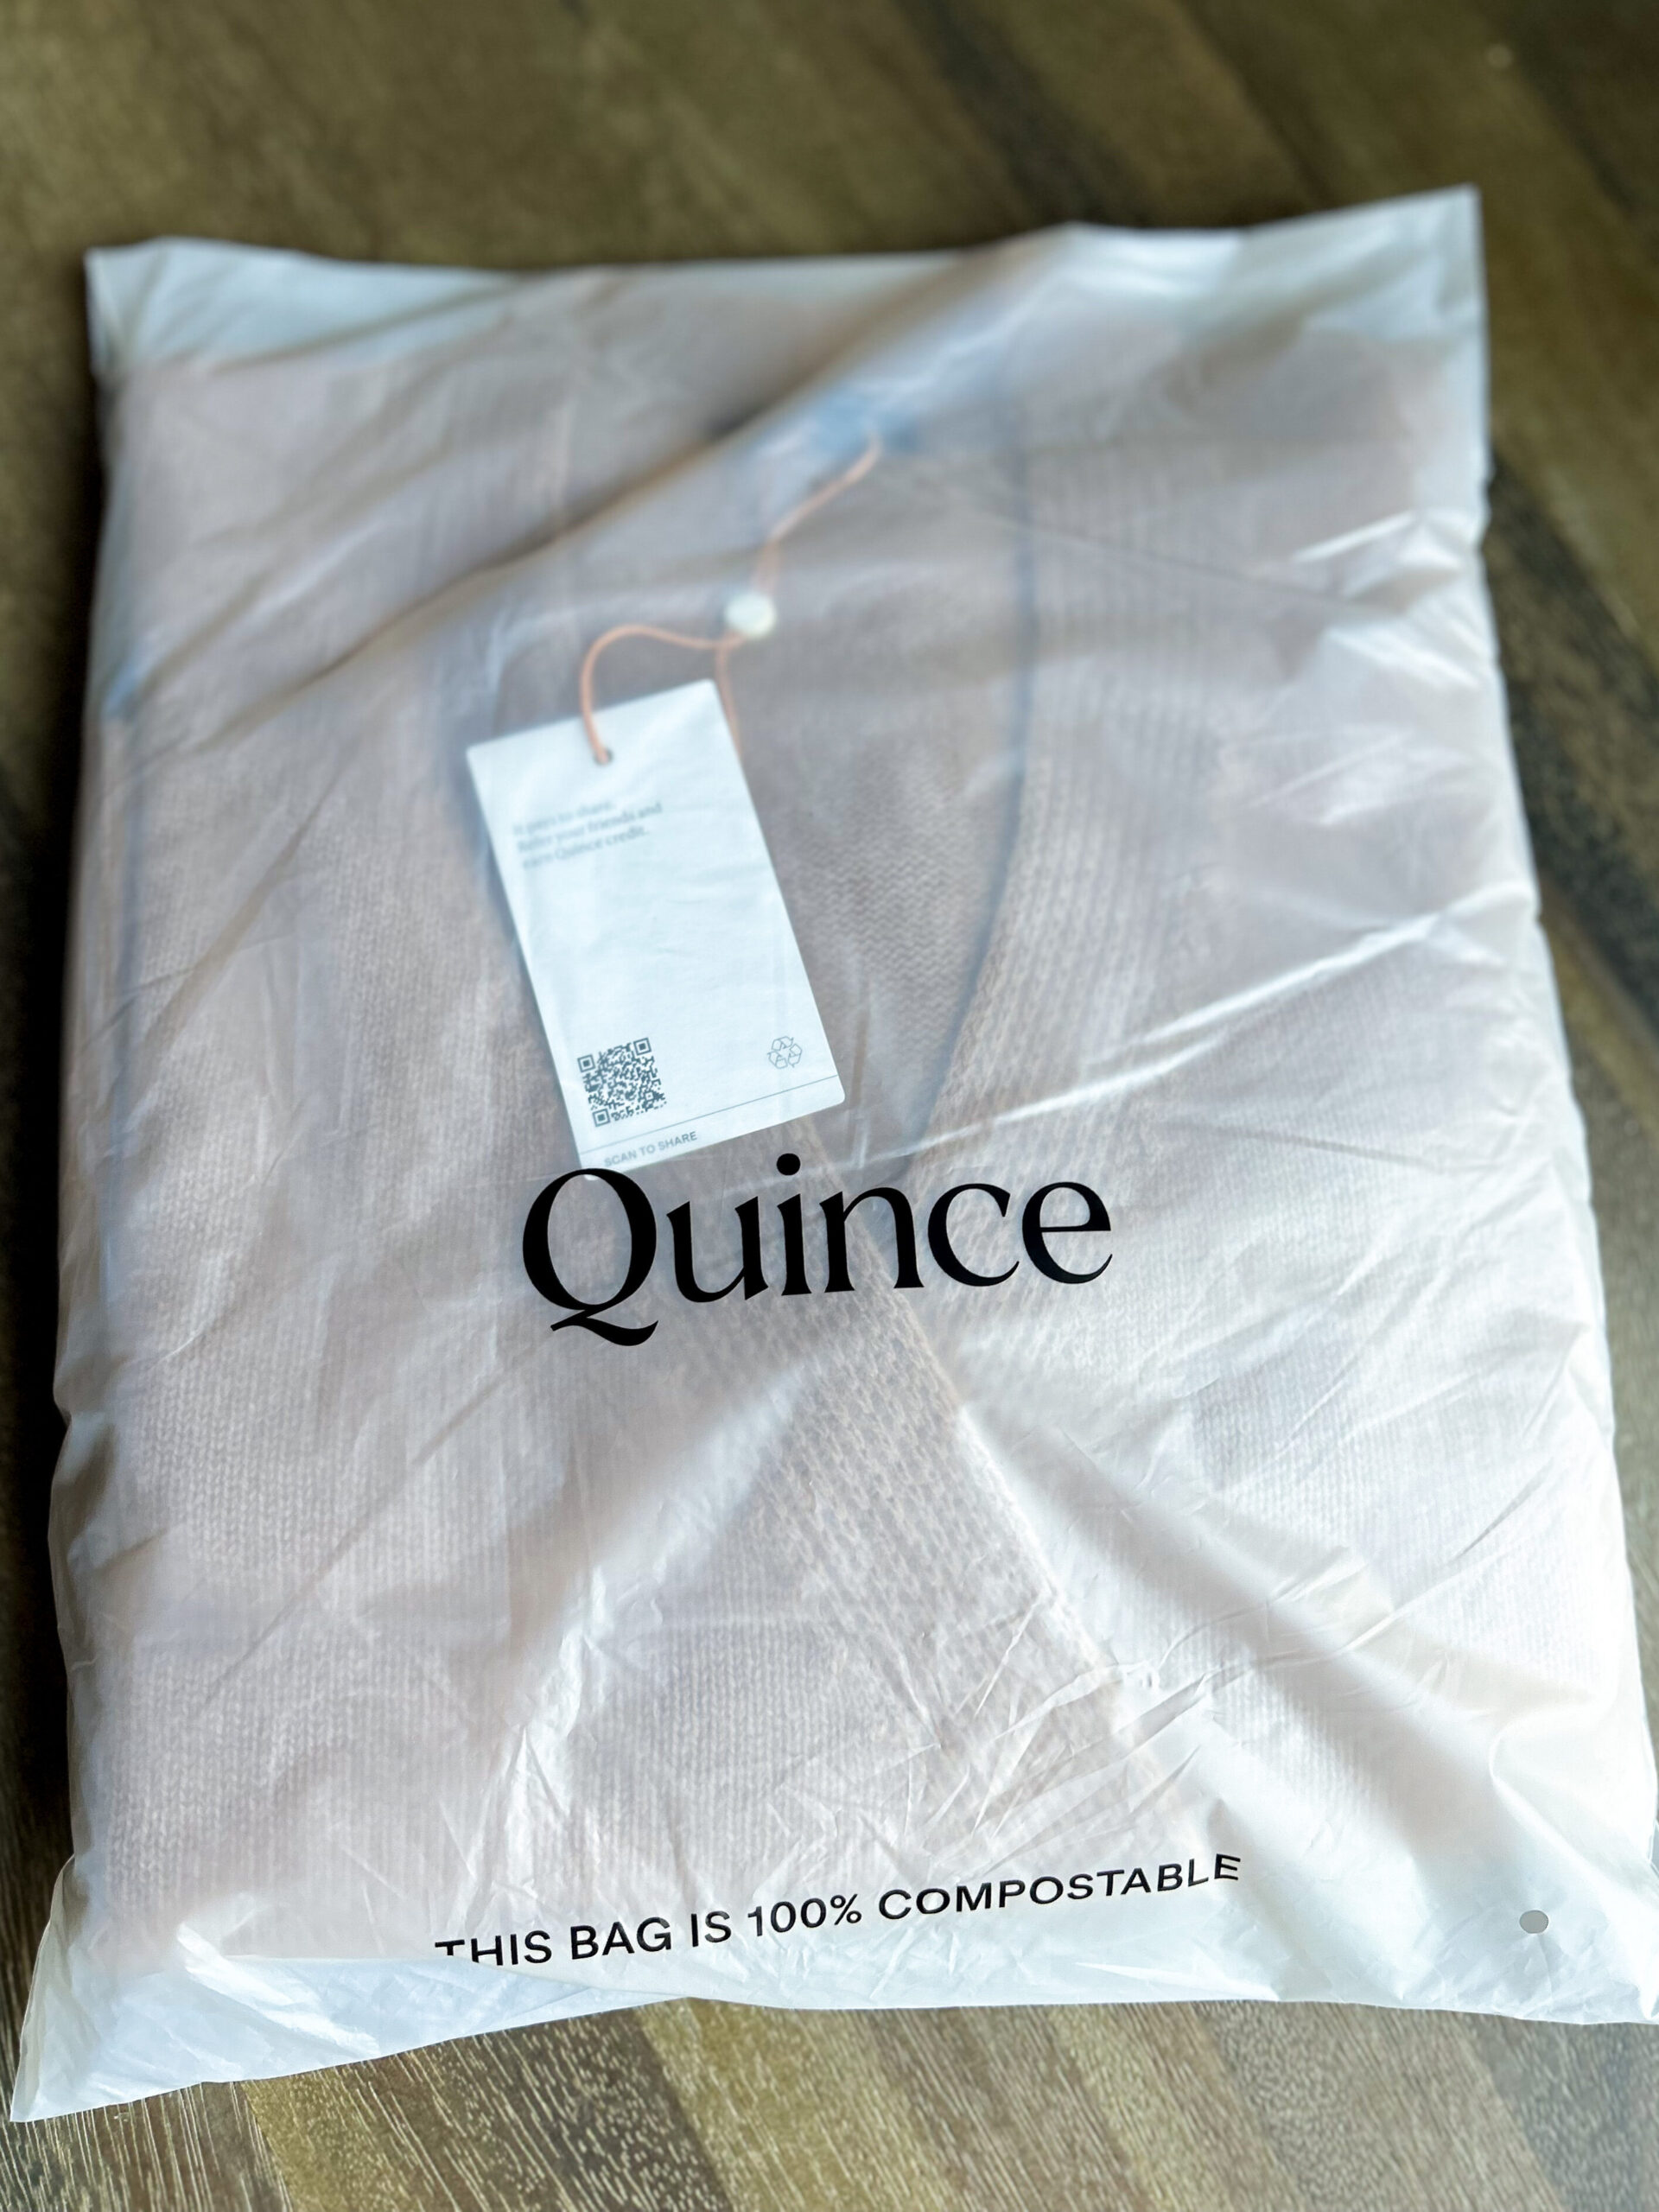 Is Quince (onequince.com) a trustworthy brand? : r/capsulewardrobe